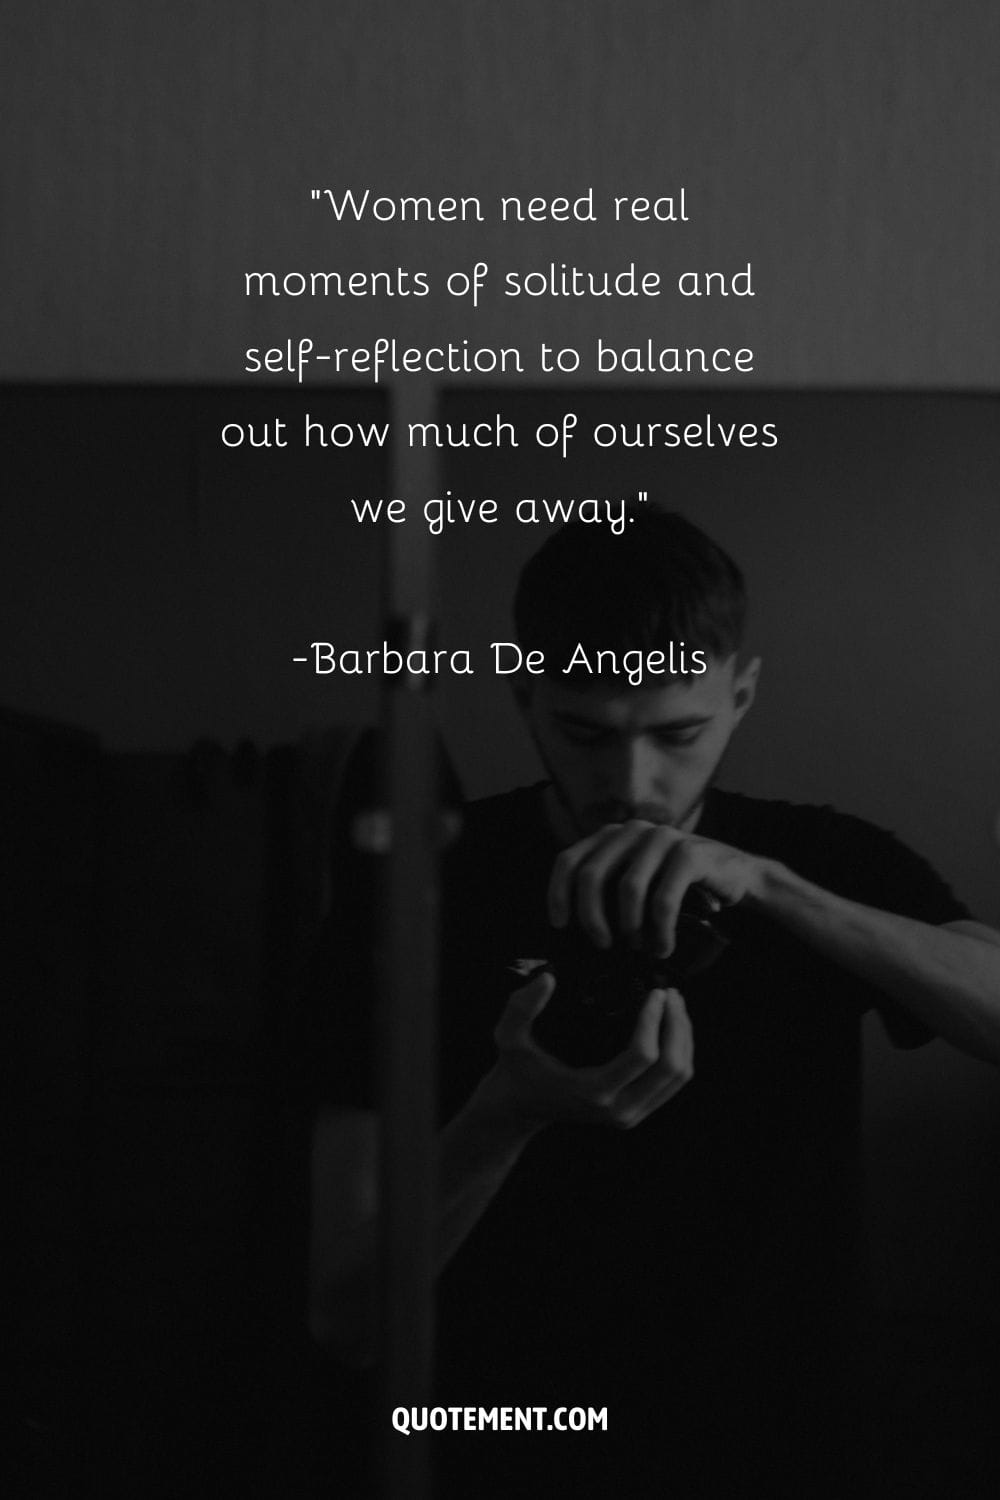 Women need real moments of solitude and self-reflection to balance out how much of ourselves we give away. – Barbara De Angelis